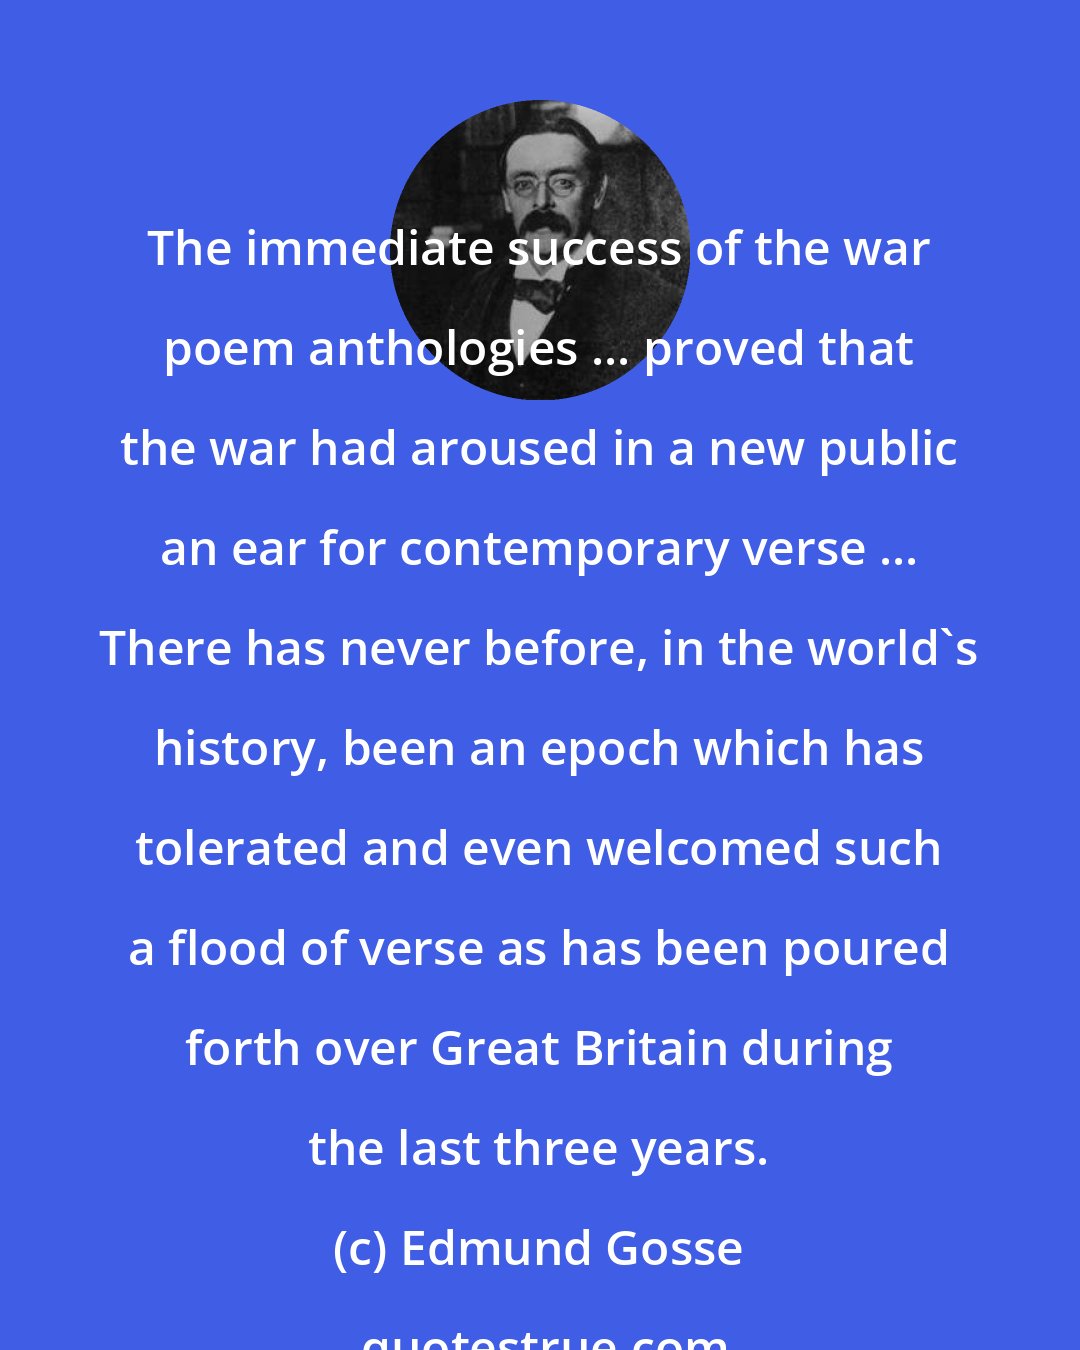 Edmund Gosse: The immediate success of the war poem anthologies ... proved that the war had aroused in a new public an ear for contemporary verse ... There has never before, in the world's history, been an epoch which has tolerated and even welcomed such a flood of verse as has been poured forth over Great Britain during the last three years.